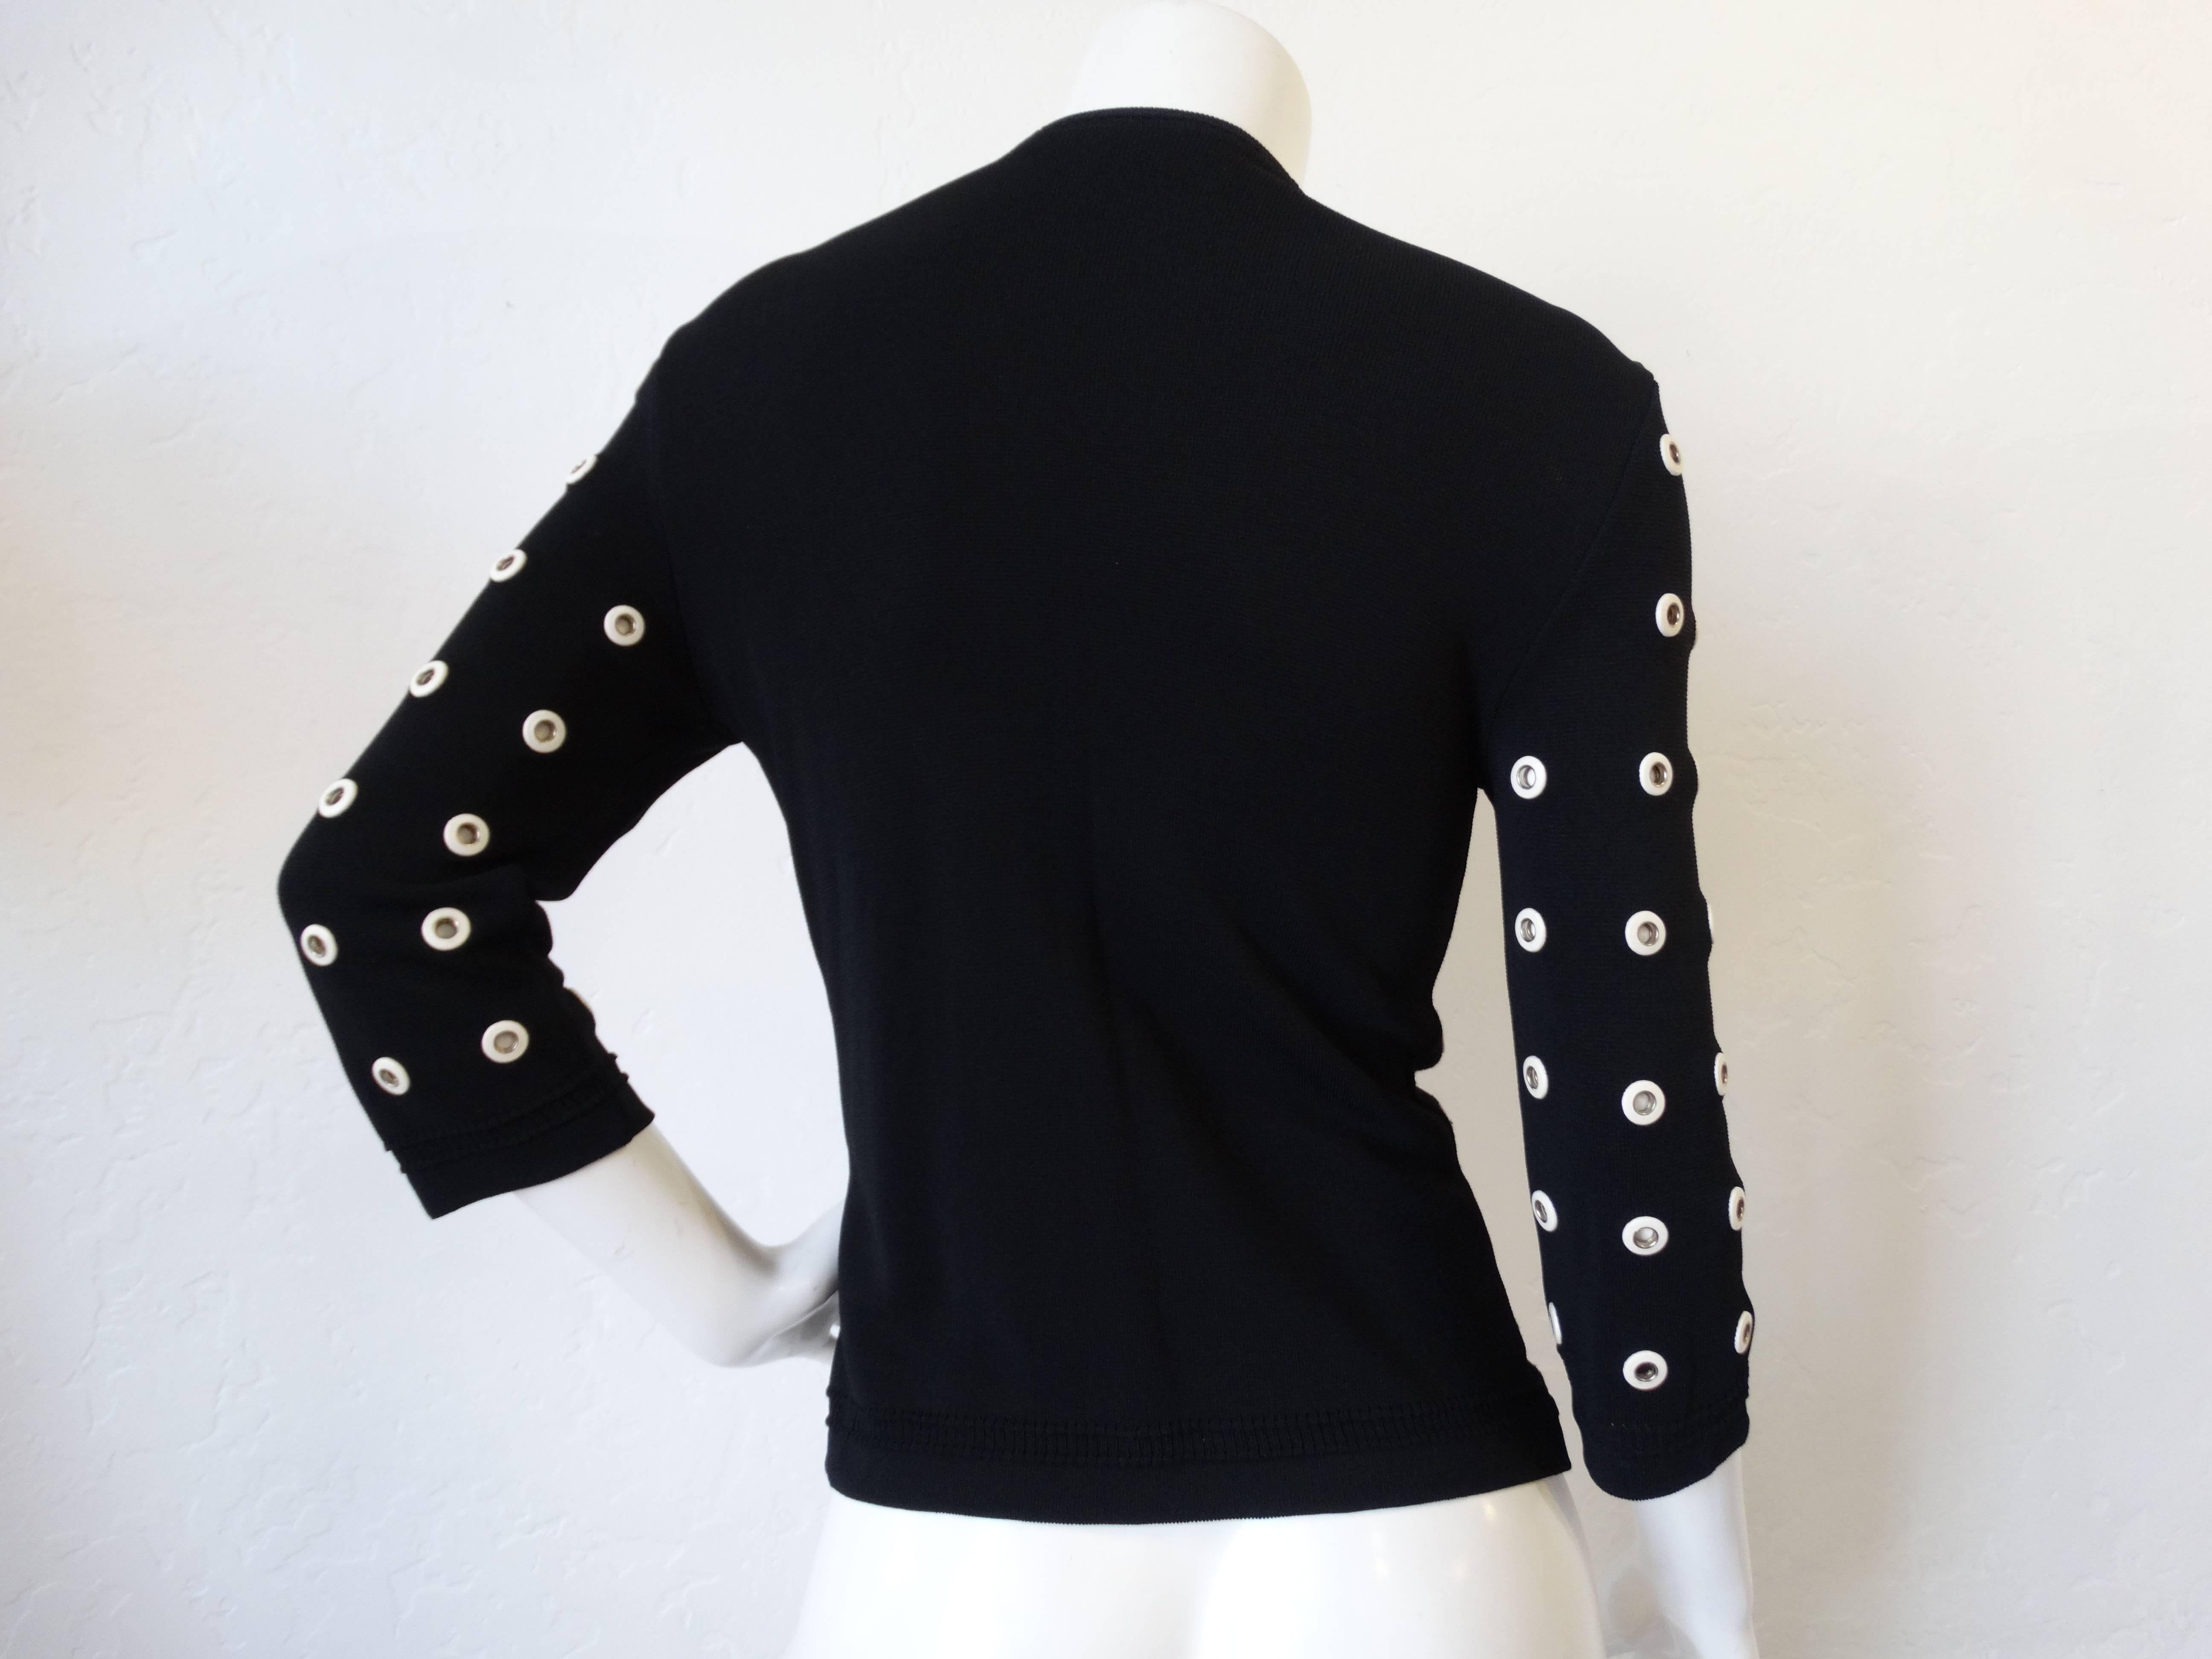 Edgy leather eyelet cardigan sweater from Gianfranco Ferre! Black knit fabric accented with leather white eyelets all over! Snaps up the front with matching eyelet buttons. Marked a size 44, best fits a small. 

Bust: 34”
Length: 25”
Sleeve: 17.5”